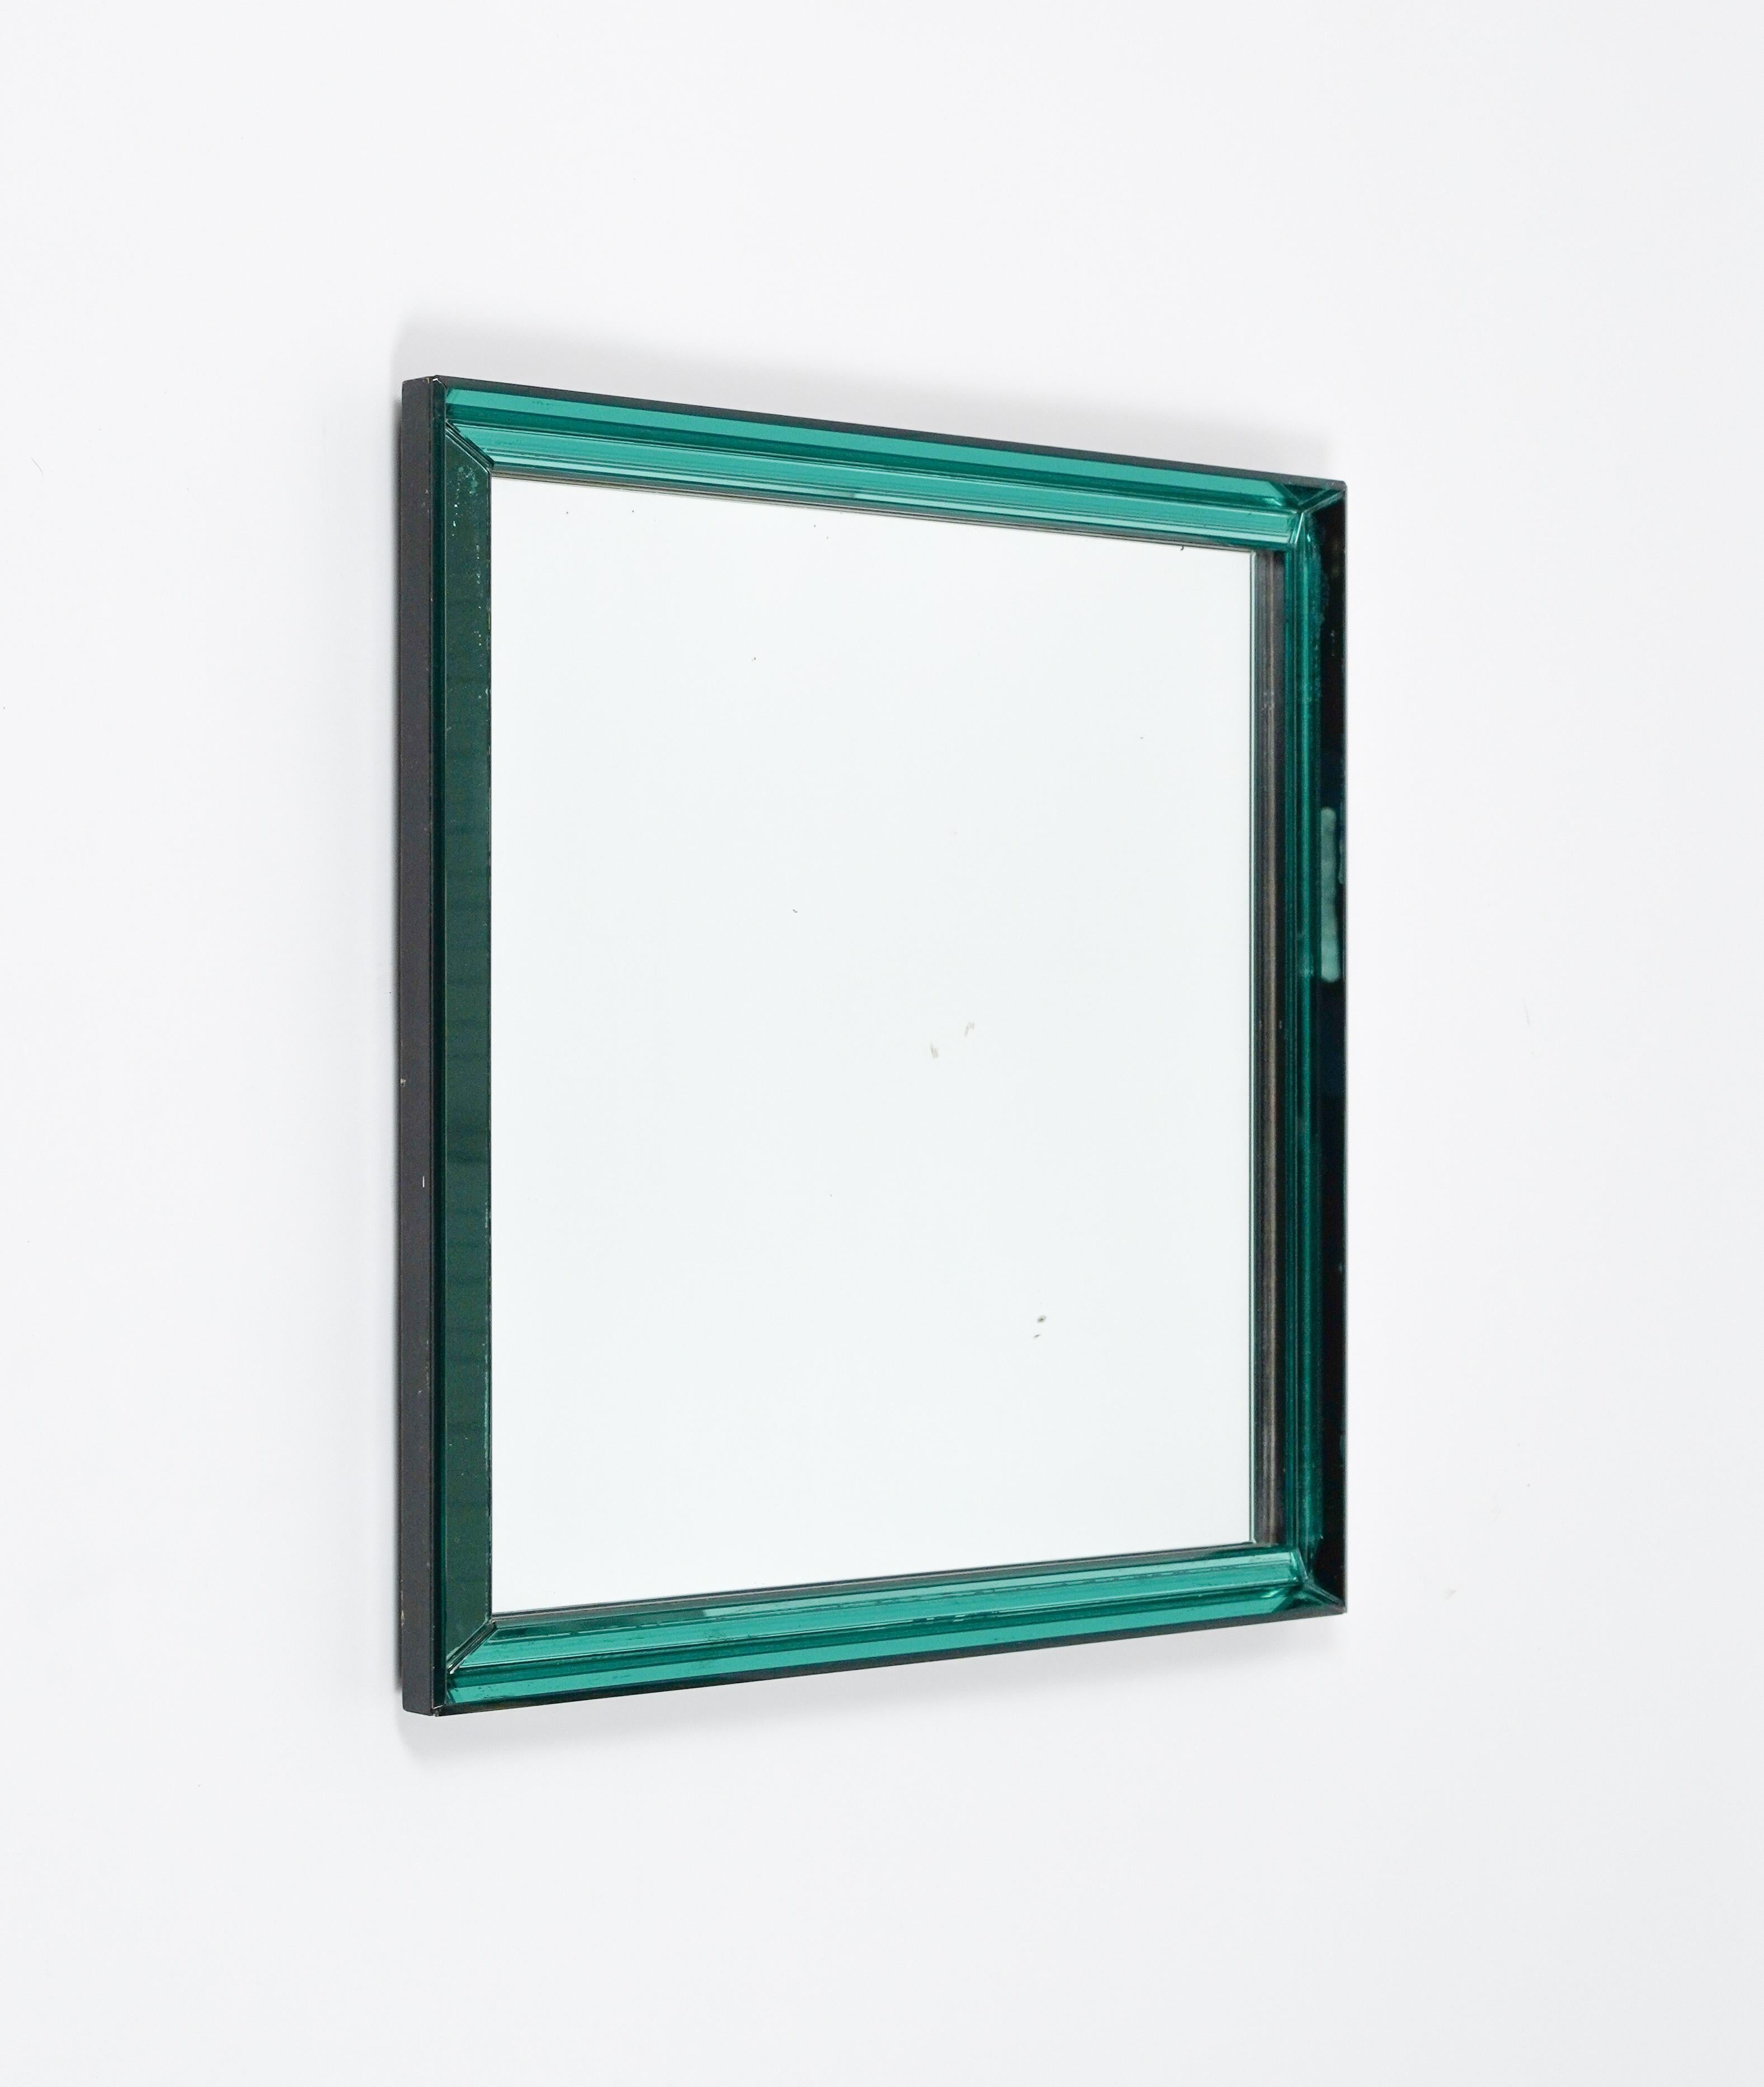 Italian Midcentury Squared Wall Mirror by Max Ingrand for Fontana Arte, Italy 1960s For Sale